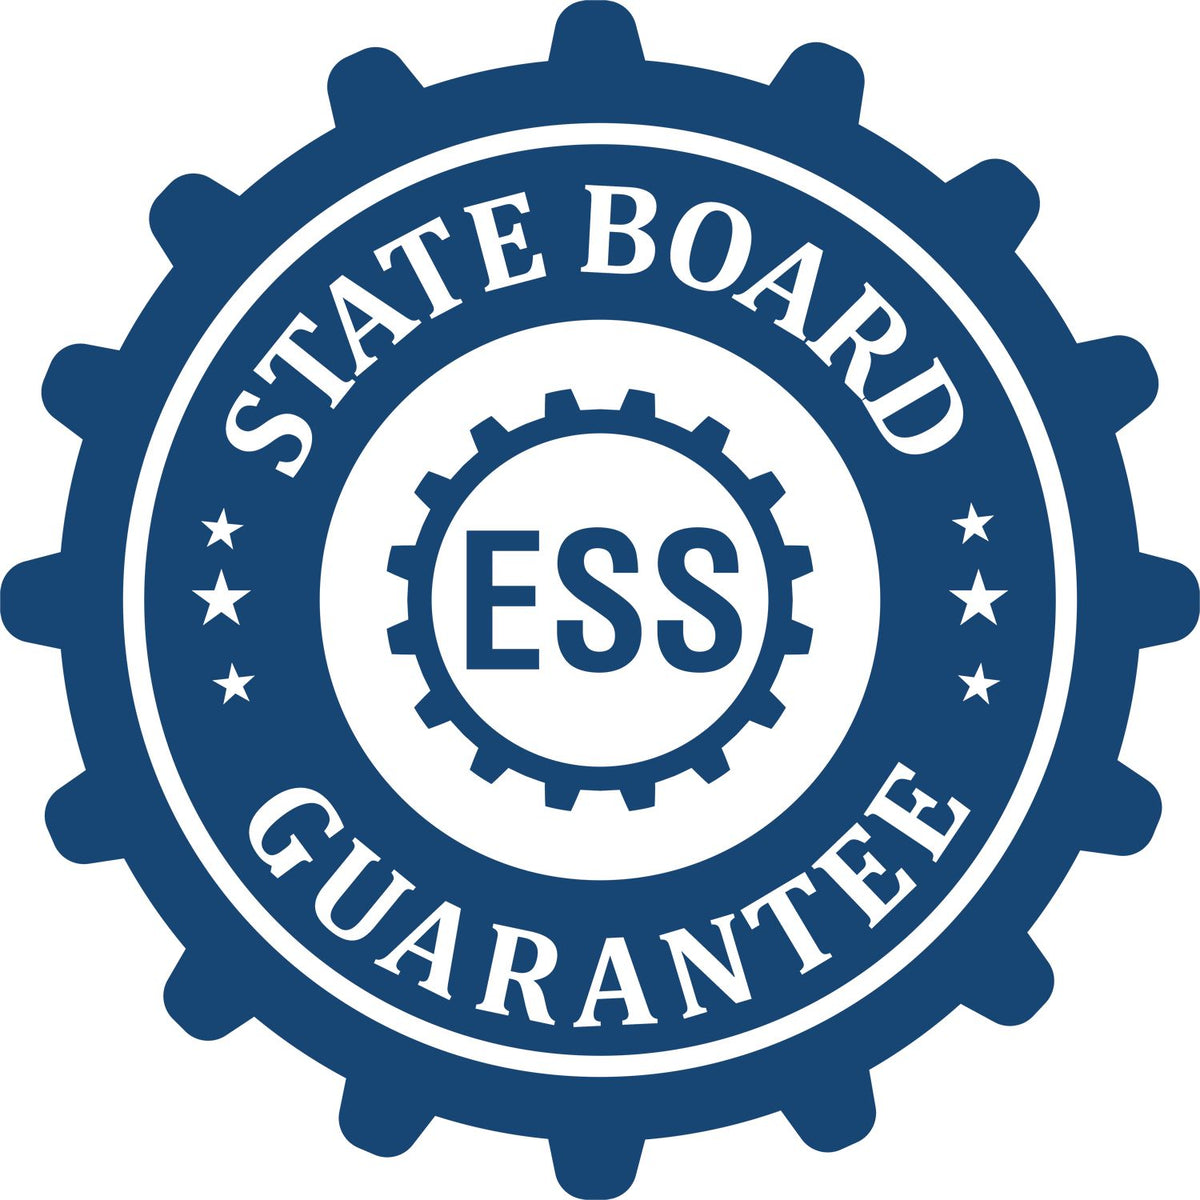 An emblem in a gear shape illustrating a state board guarantee for the Maine Geologist Desk Seal